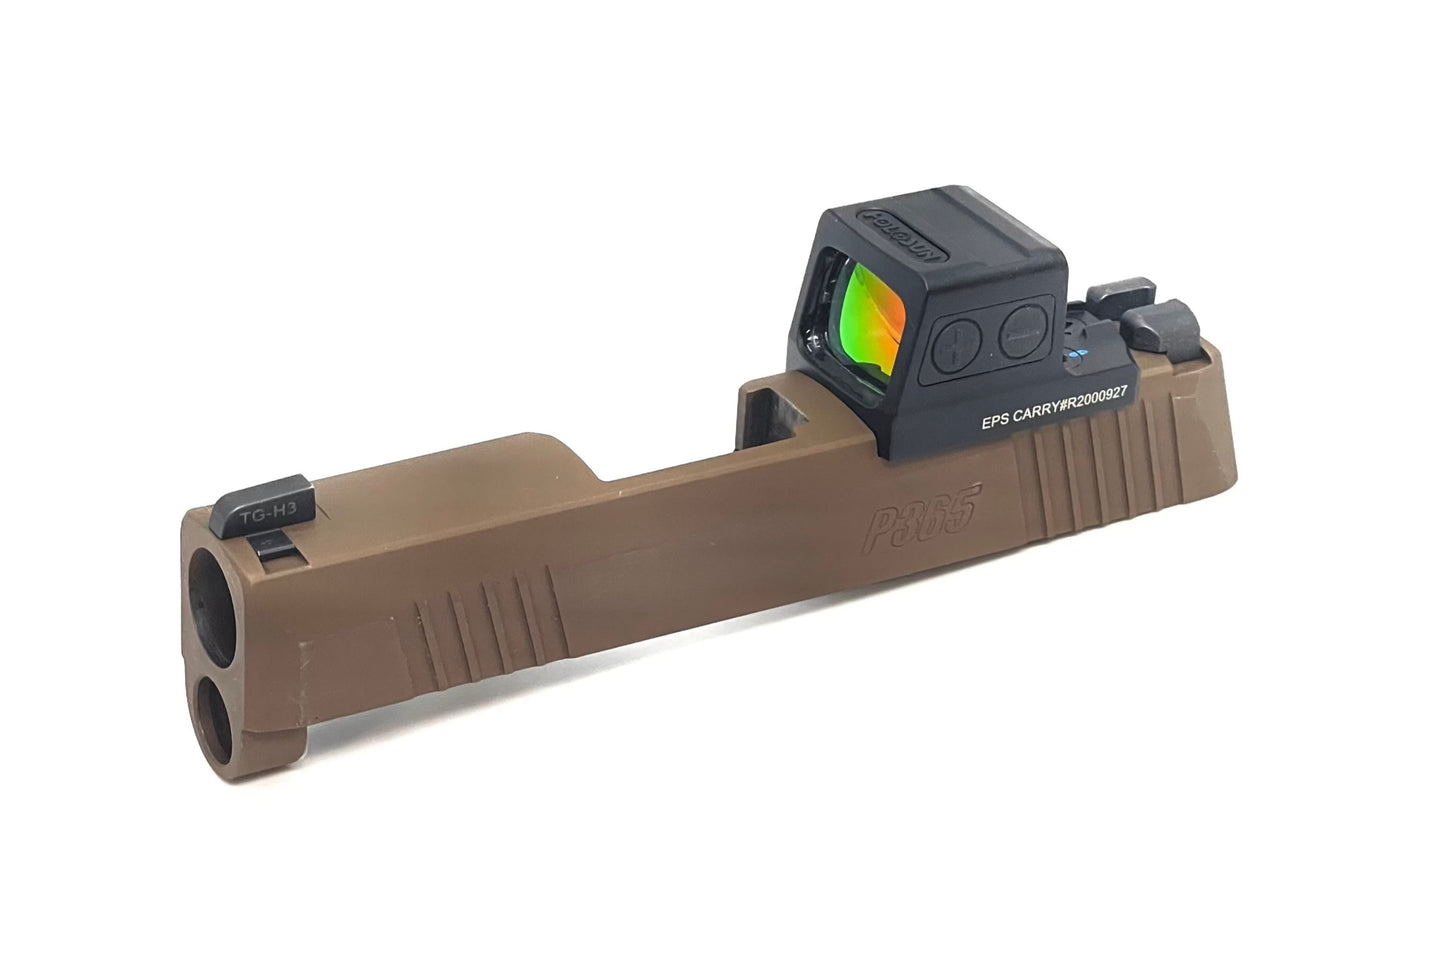 SIG SAUER P365 Holosun HS EPS Carry 407k 507k RMSC Direct Mount Low Profile Optic Cut Red Dot Green Dot Slide Milling Front Angle